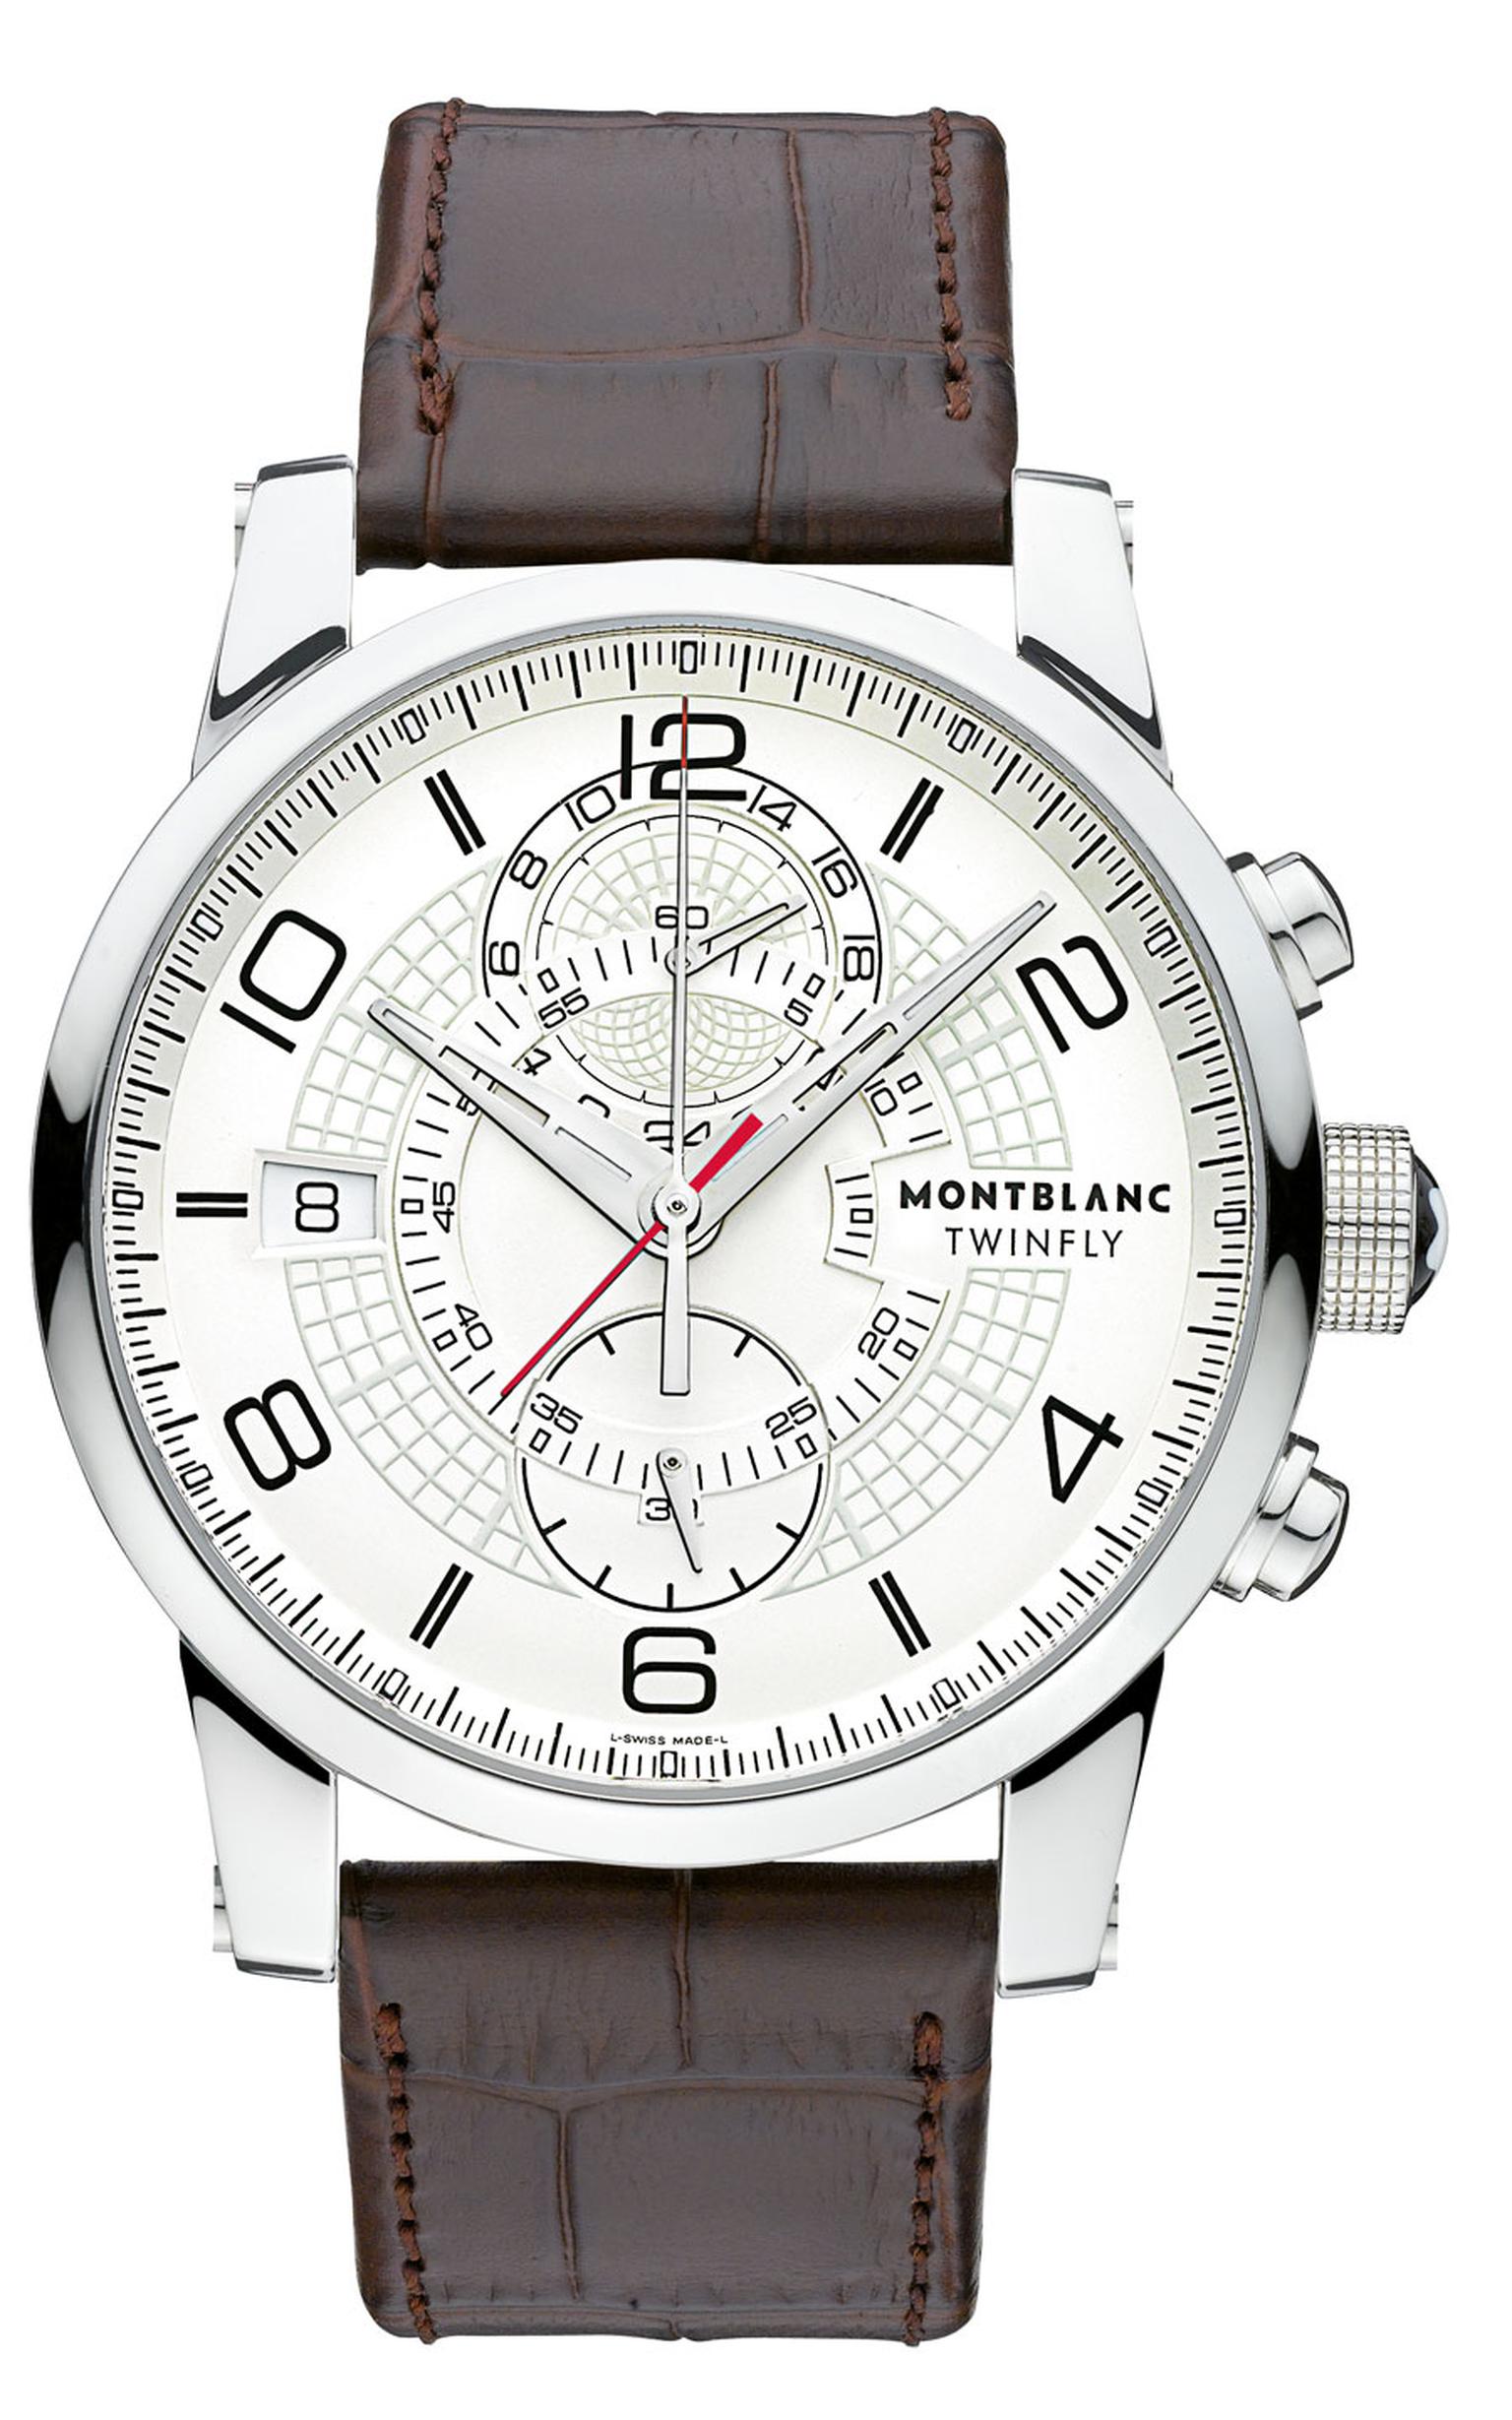 Montblanc-TimeWalker-TwinFly-Chronograph-front.jpg